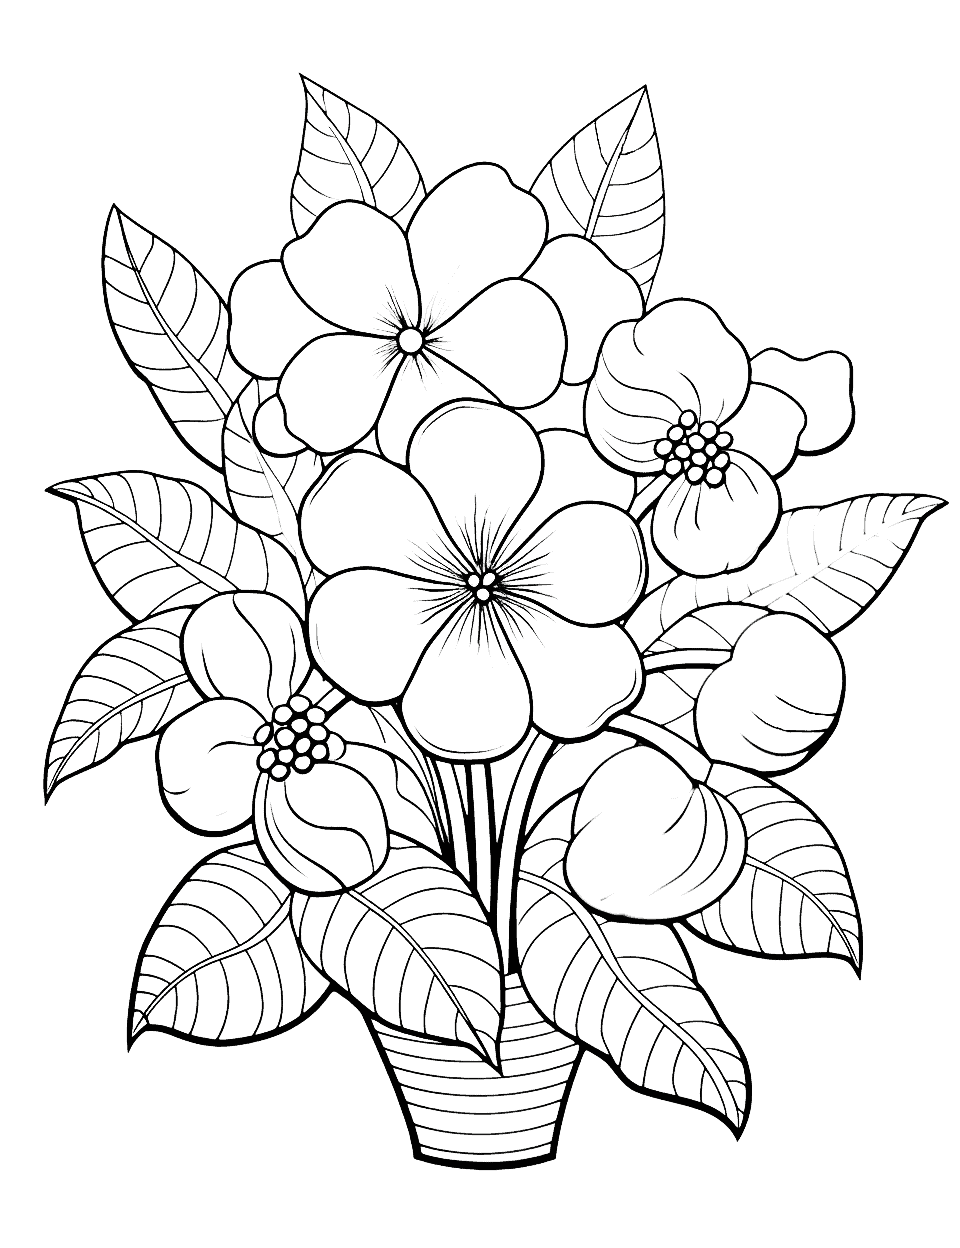 Tropical Paradise Flower Coloring Page - Coloring page featuring a variety of tropical flowers.